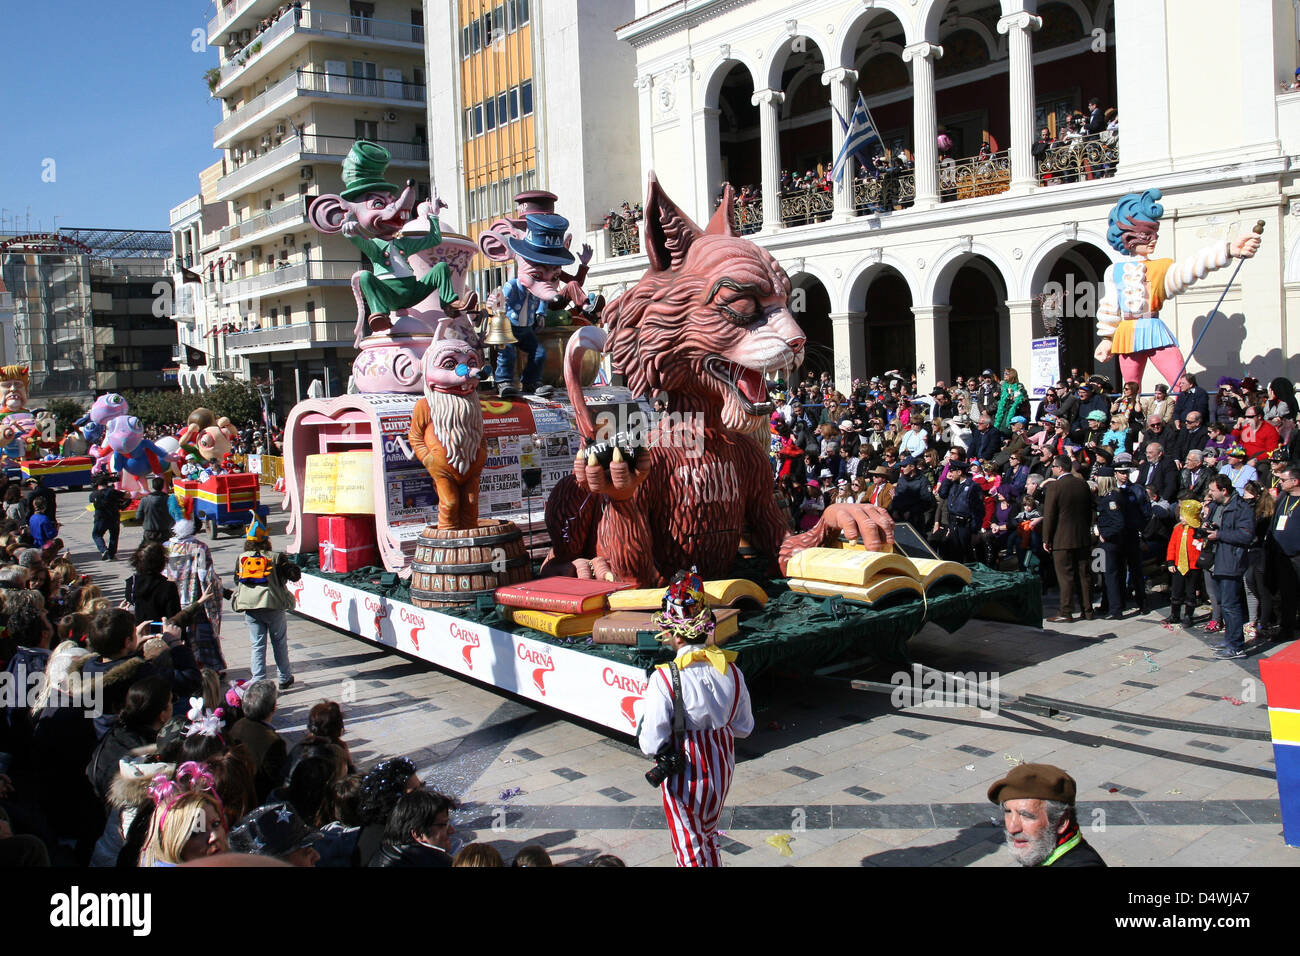 Patras, Greece. 17th March 2013. The cat carnival float moves through the busy street at the Carnival in Patras, Greece, 17 March 2013. Three mice hang a bell at the cat's tail. The mice reflect the greek government, in aristocratic appearance, has all the features of the political system. The cat, representing troika, in one hand holds three bombs which reads 'explosive economic growth' while reading the memorandums. The Patras Carnival is the biggest event of its kind in Greece and one of the biggest in Europe. Photo: Menelaos Michalatos/dpa/Alamy Live News Stock Photo